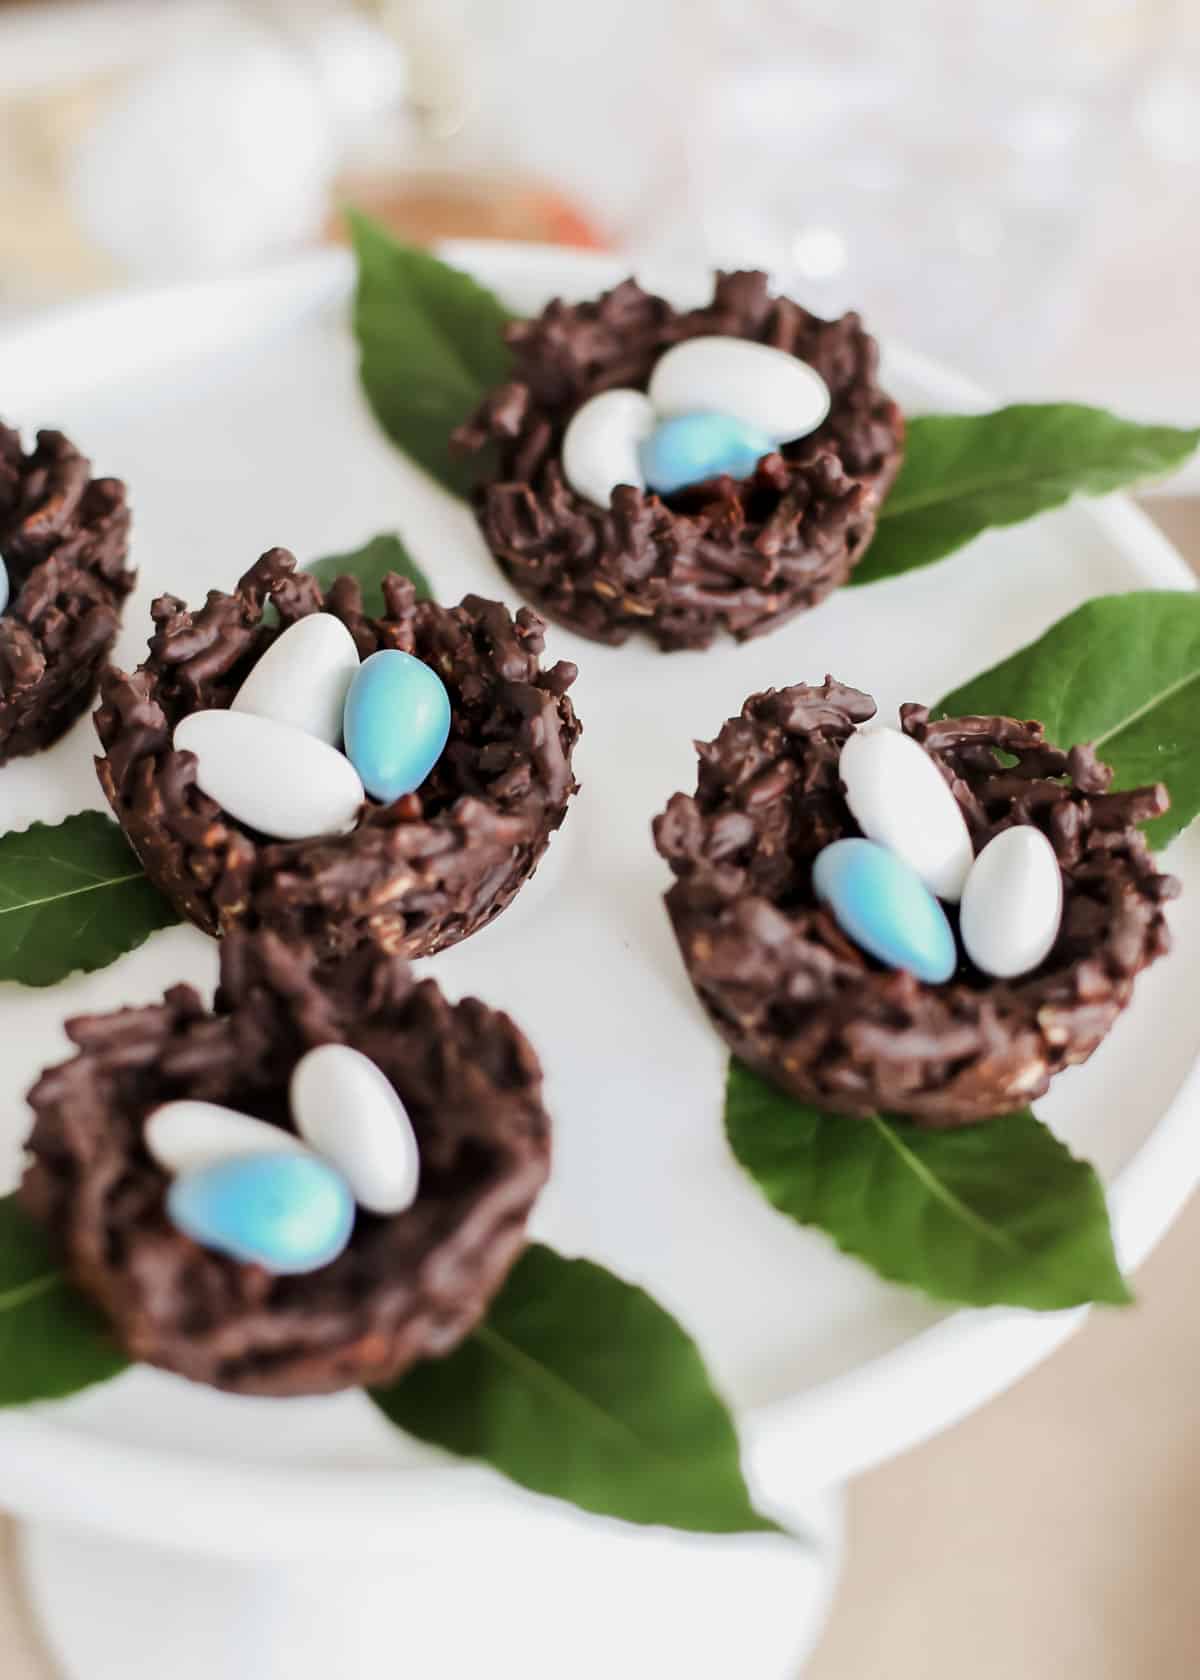 chocolate nest shaped mini desserts with candy eggs inside, on white platter.